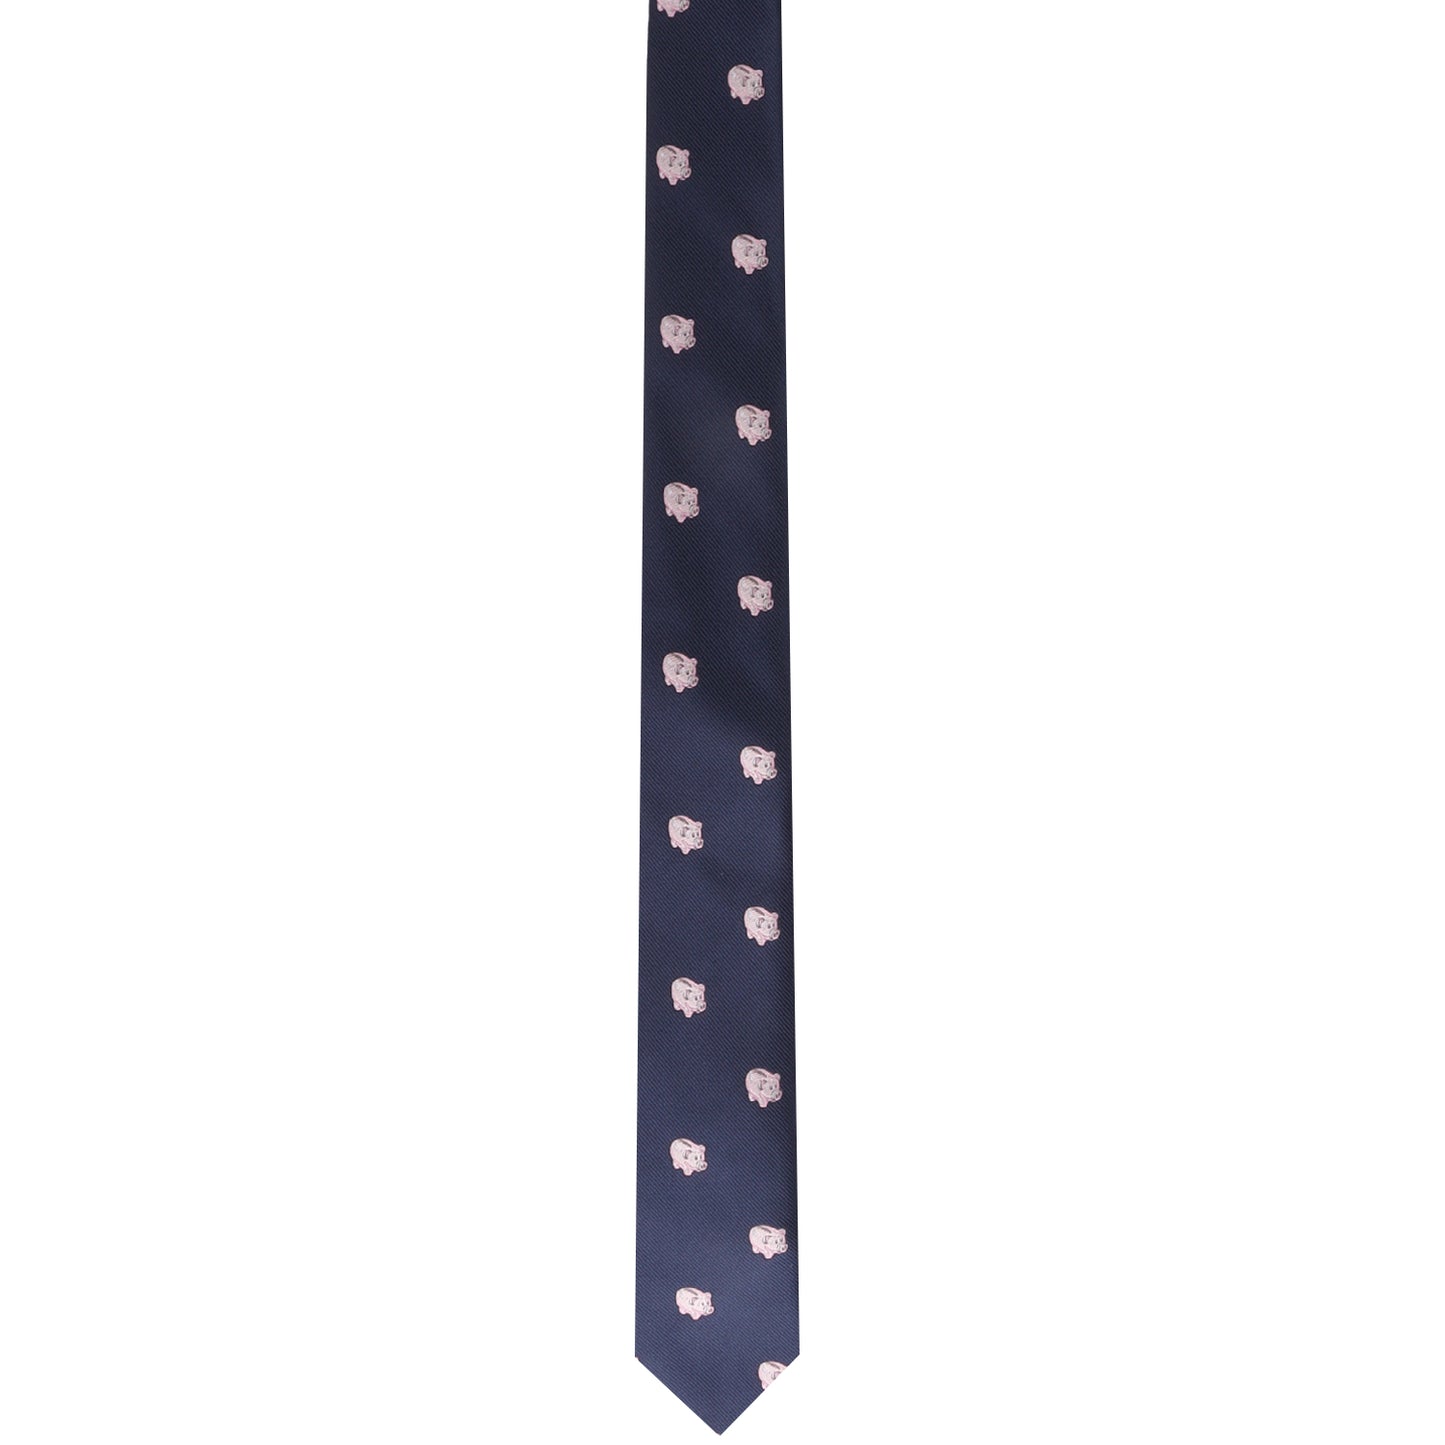 A dark blue Piggy Bank Skinny Tie featuring a pattern of small white and light pink floral designs that truly stands out and exudes sophistication.